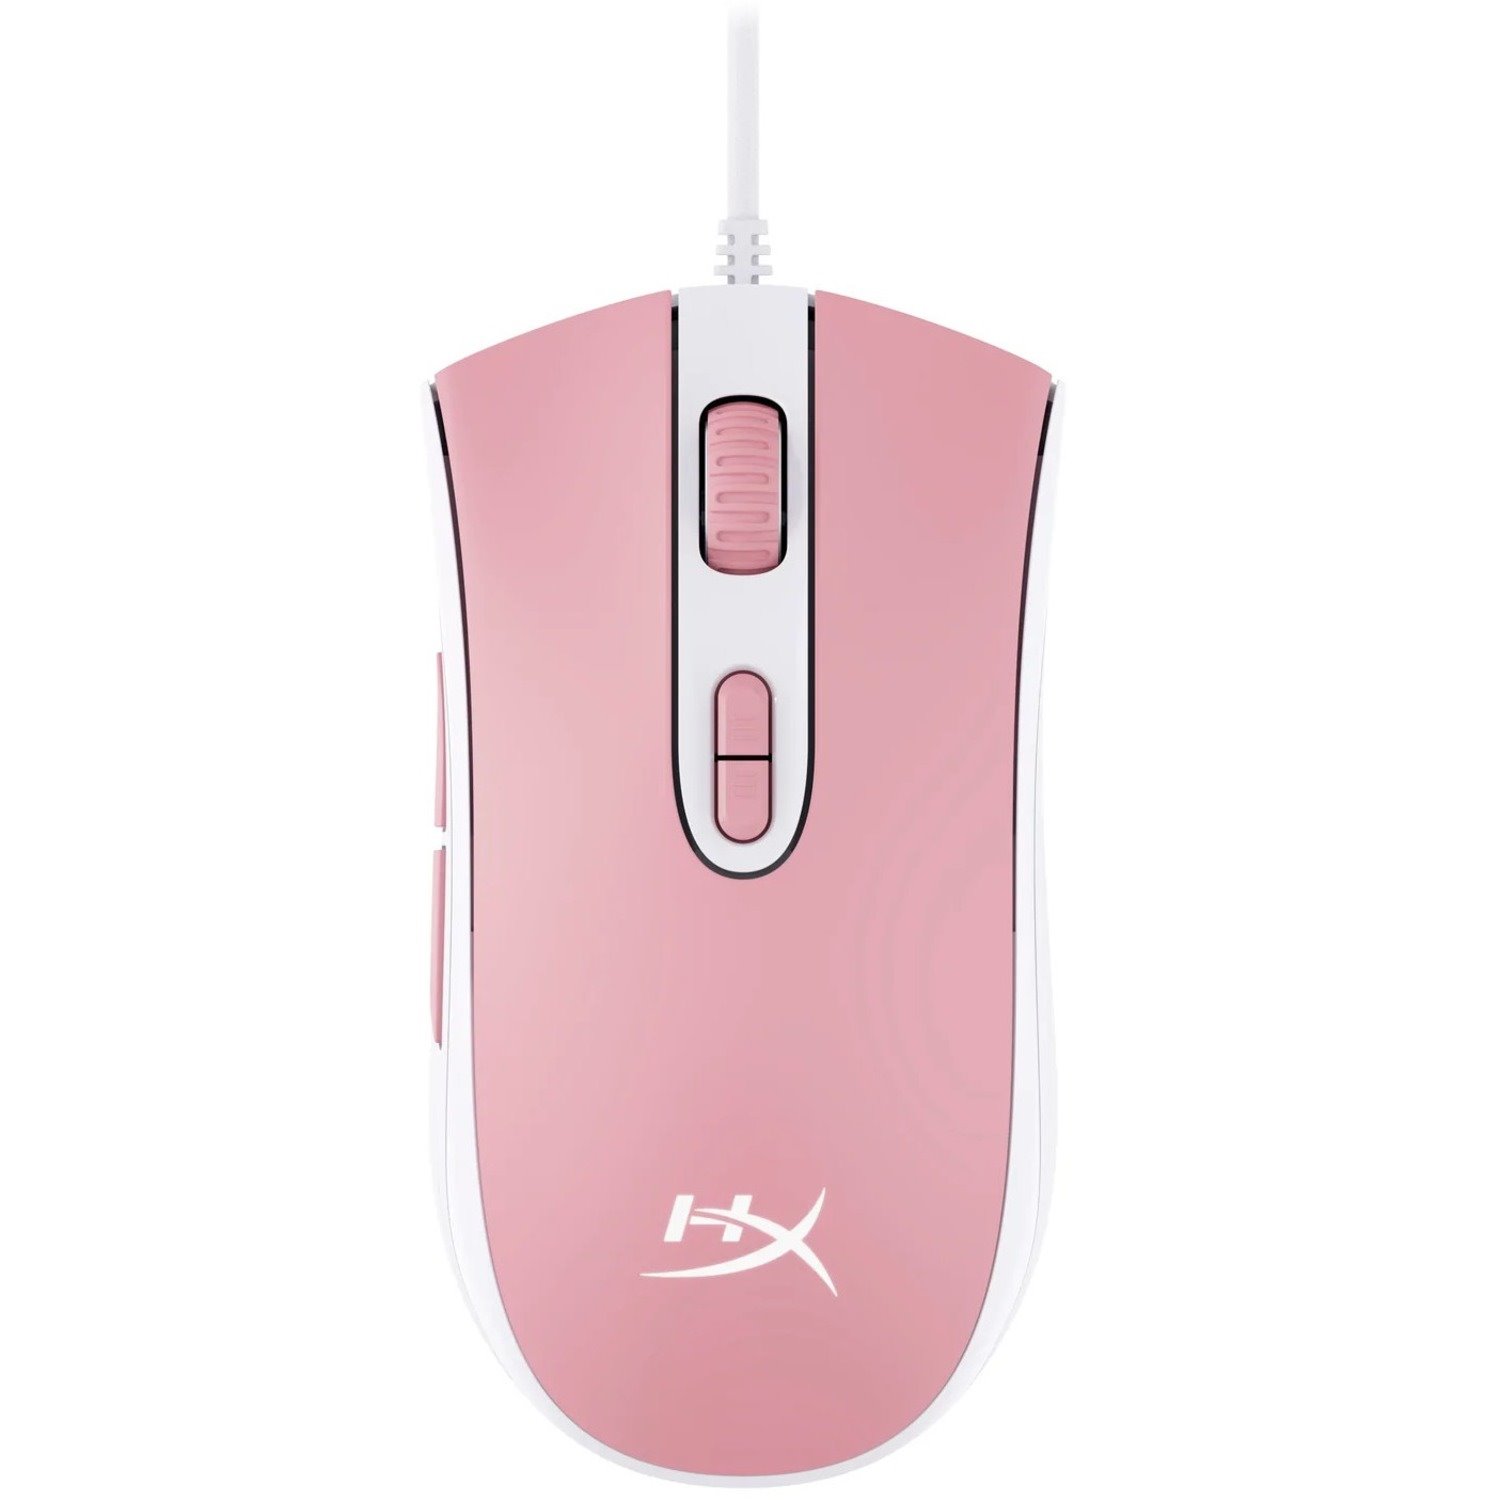 HyperX Pulsefire Core Gaming Mouse - USB 2.0 - Optical - 7 Button(s) - 7 Programmable Button(s) - Pink, White